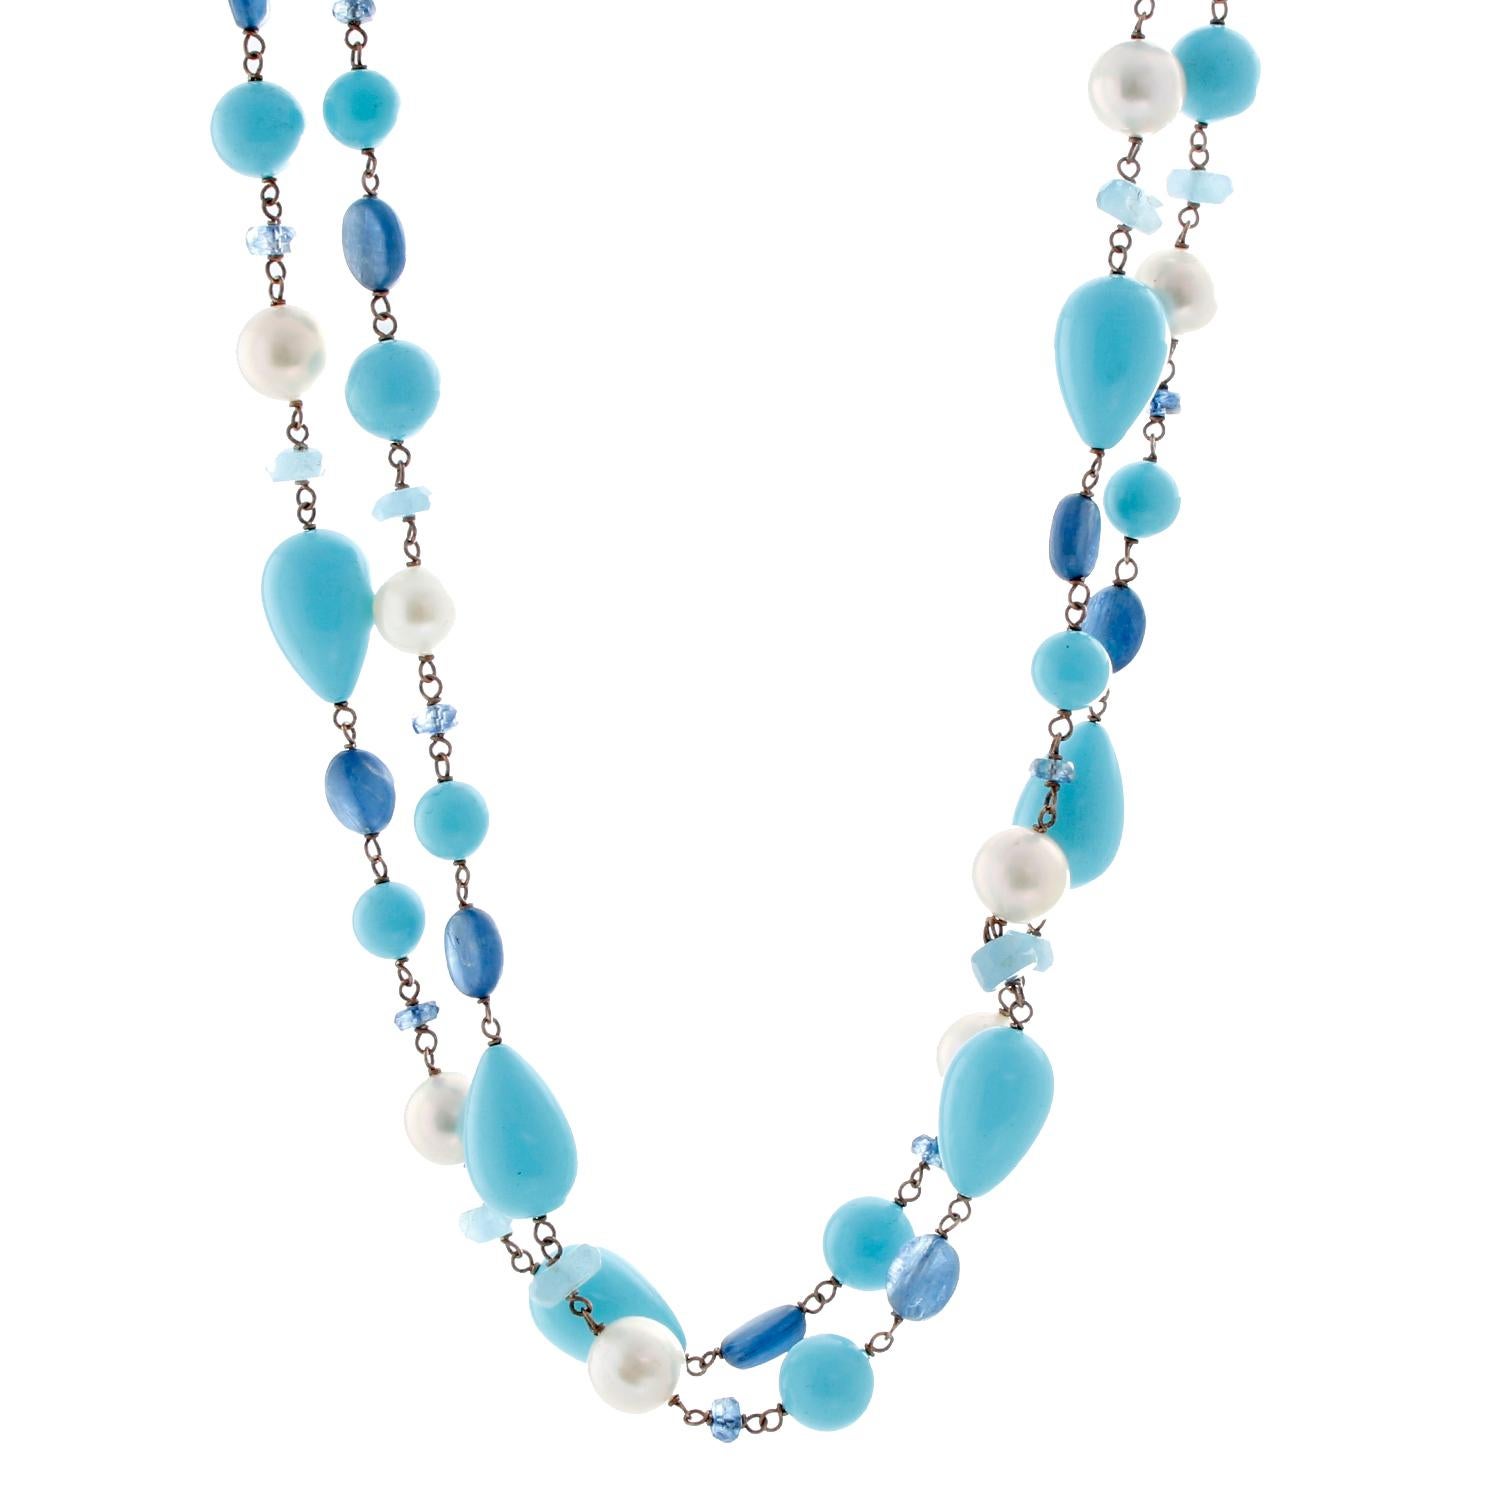 Turquoise, Pearl and Other Stones Sterling Silver Necklace - Length 36 inches. Can be worn double wrapped or single wrapped. Perfect for Jeans and a T shirt!. 